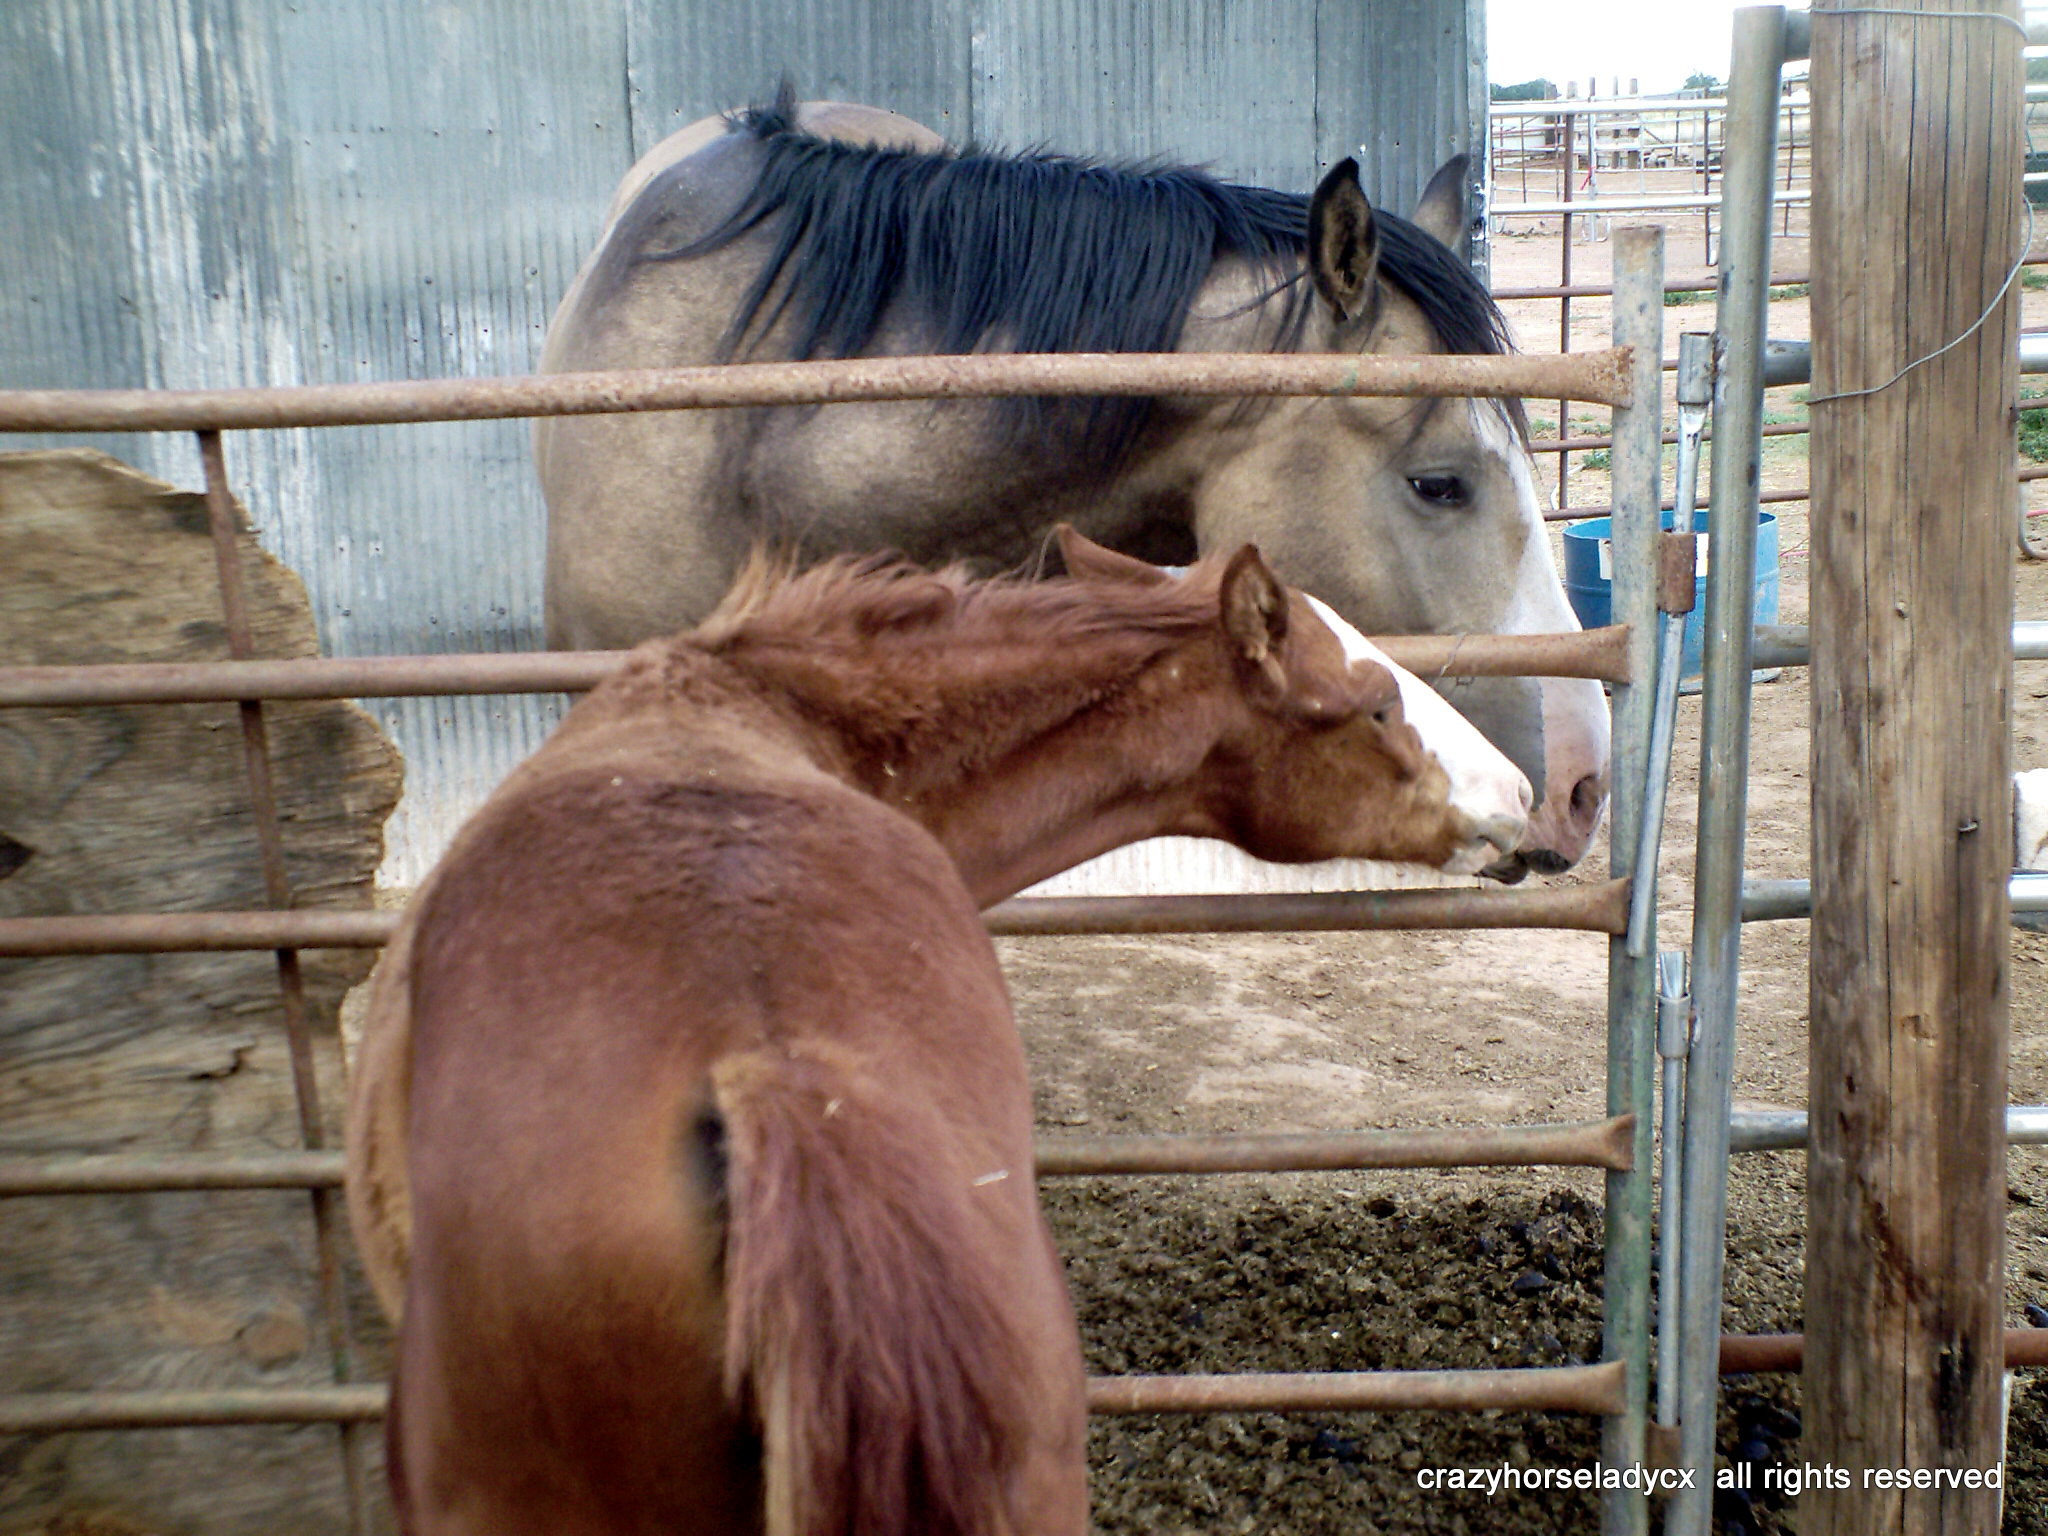 Mr. Rocky 's a 3 week ol' mustang orphan with Mr. Cisco, also a mustang ripped from their homelands 'n family ~ crazyhorseladycx